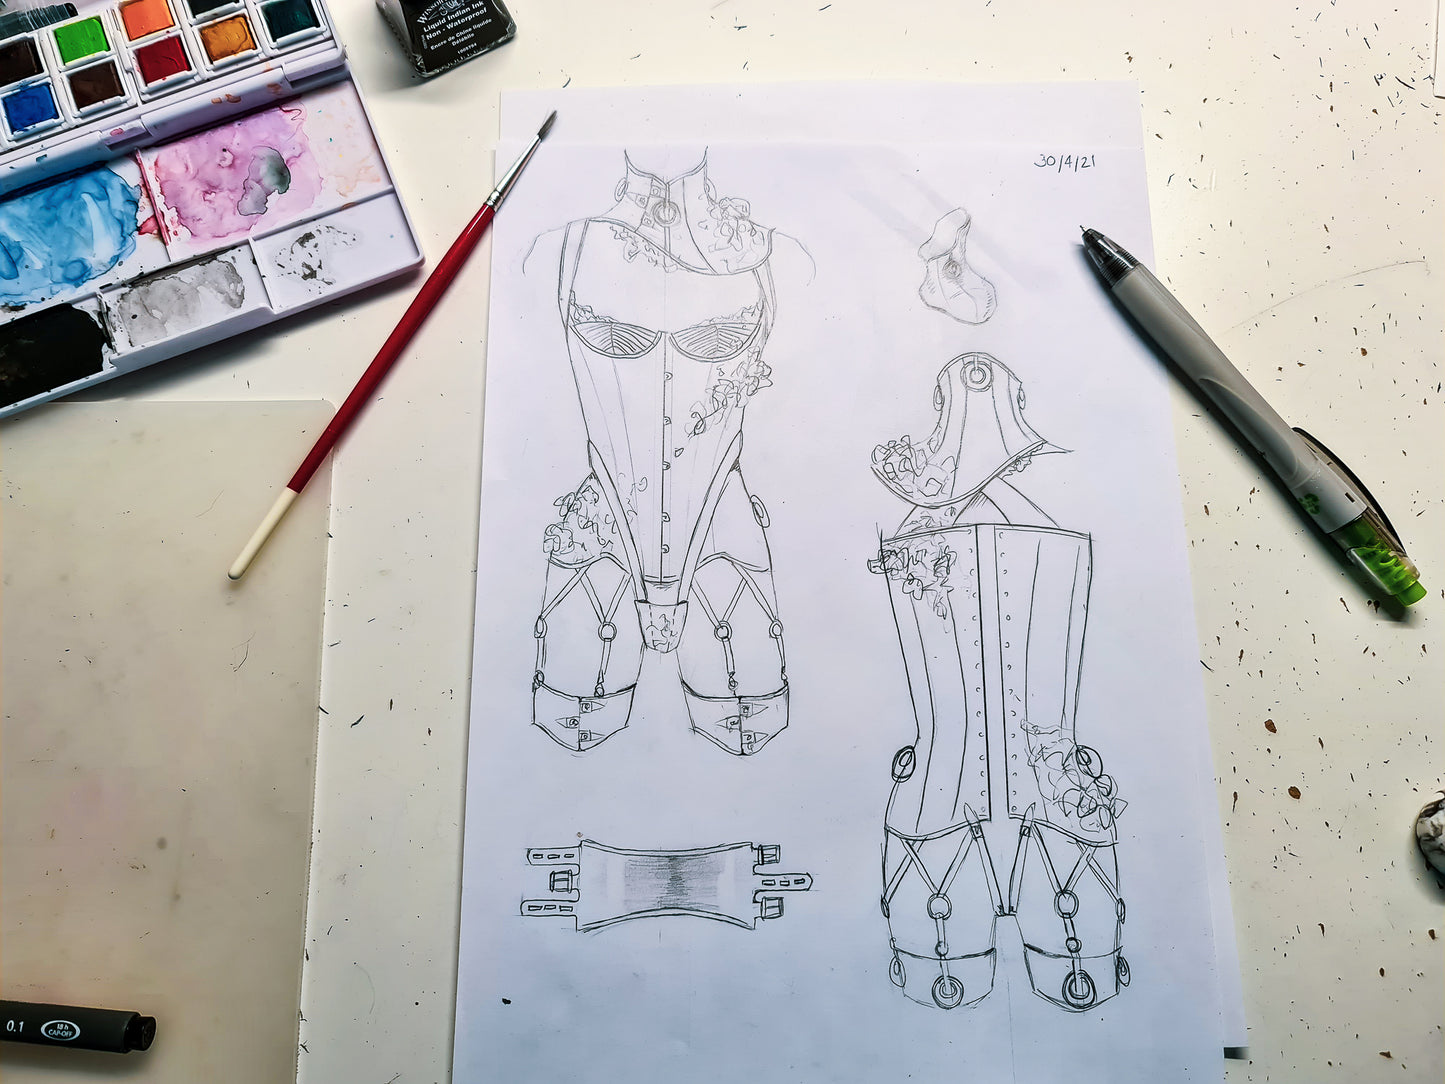 A sketch of a cupped overbust corset with matching neck corset and garters, decorated with 3D flowers